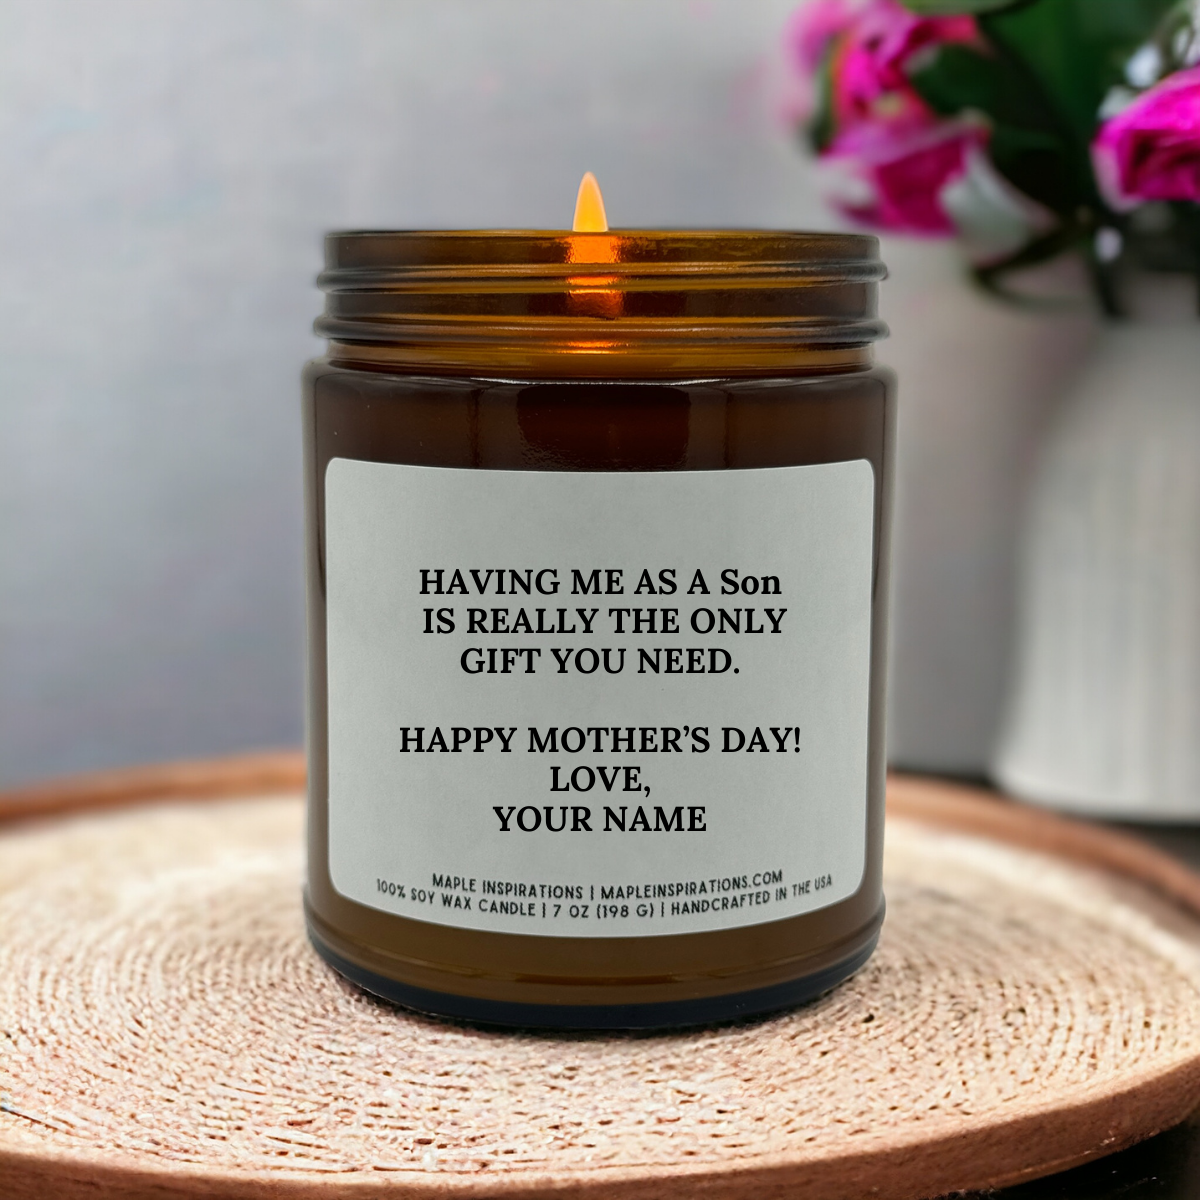 Having Me As A Son Candle - Funny Gift for Mothers Day - Mother's Day Gift for Mom From Son - Mom Candle - Sarcastic Mom Gift - Scented Soy Candle - Mothers Day Candle